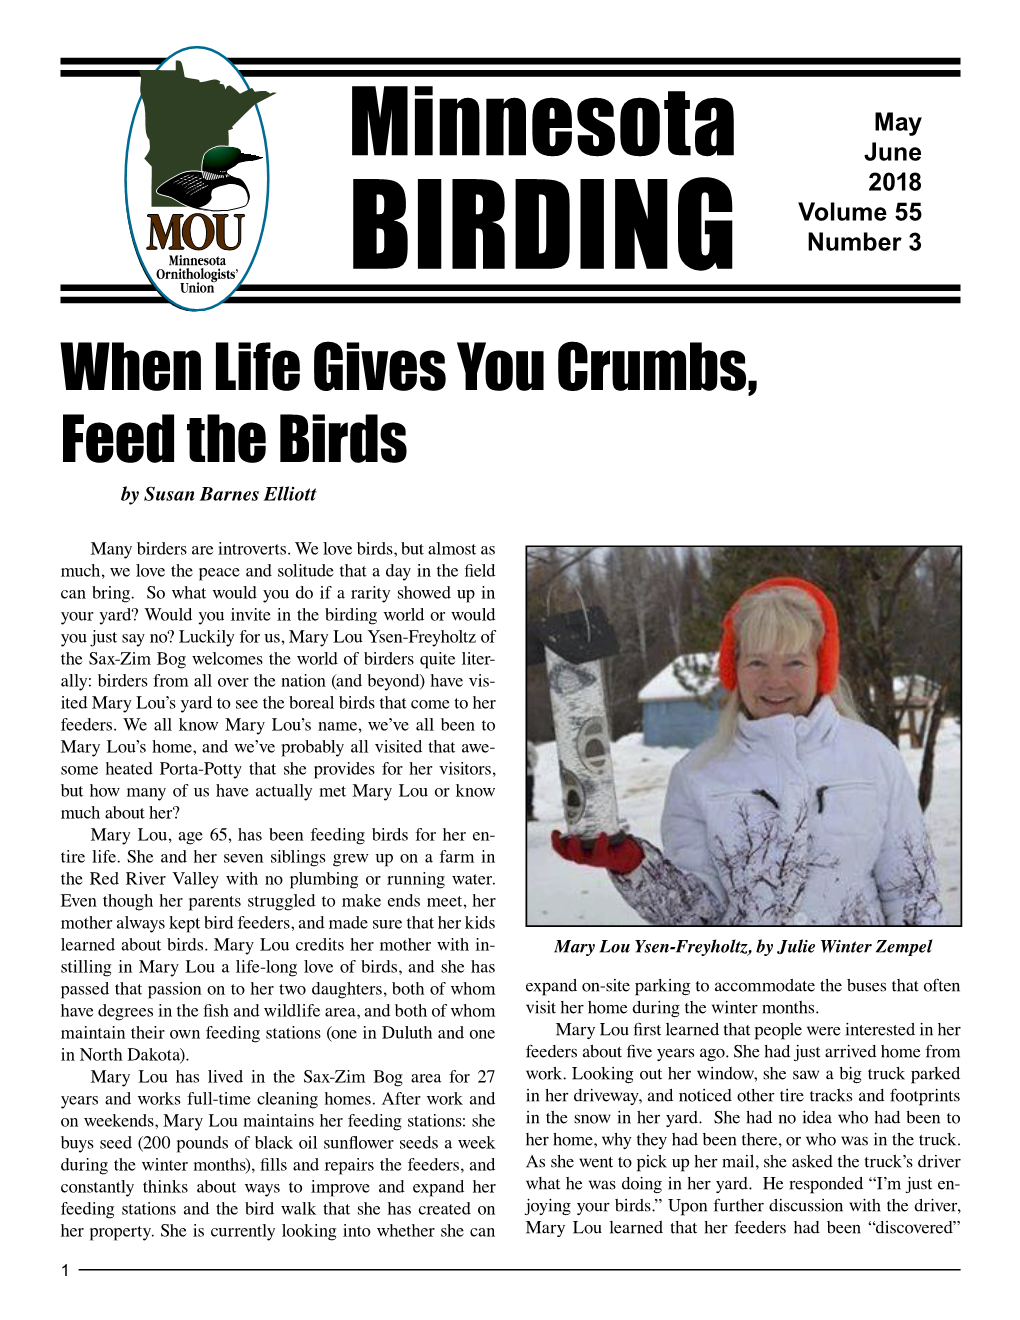 When Life Gives You Crumbs, Feed the Birds by Susan Barnes Elliott